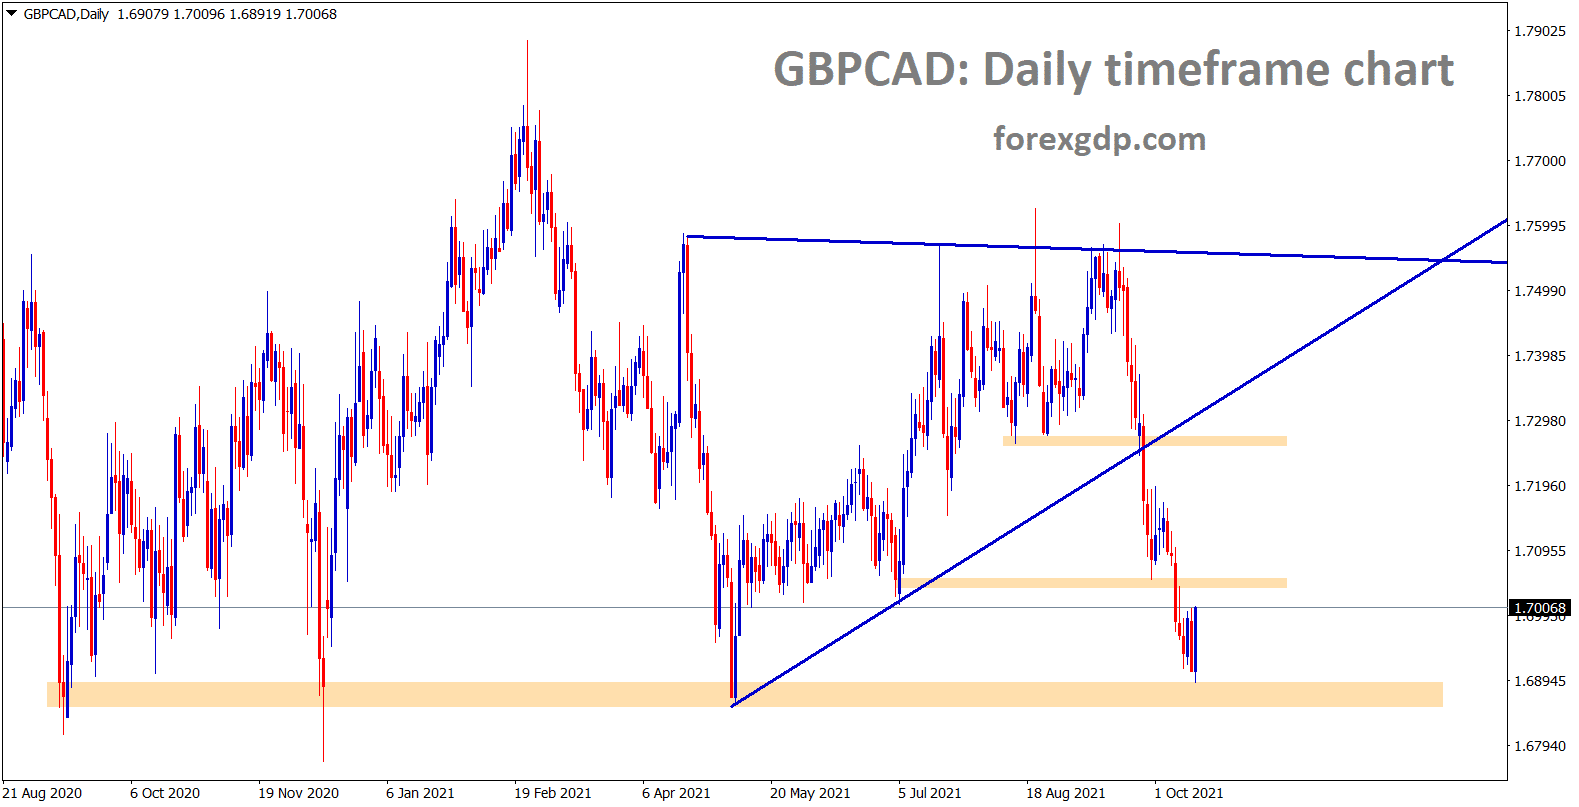 GBPCAD is consolidating at the horizontal support area